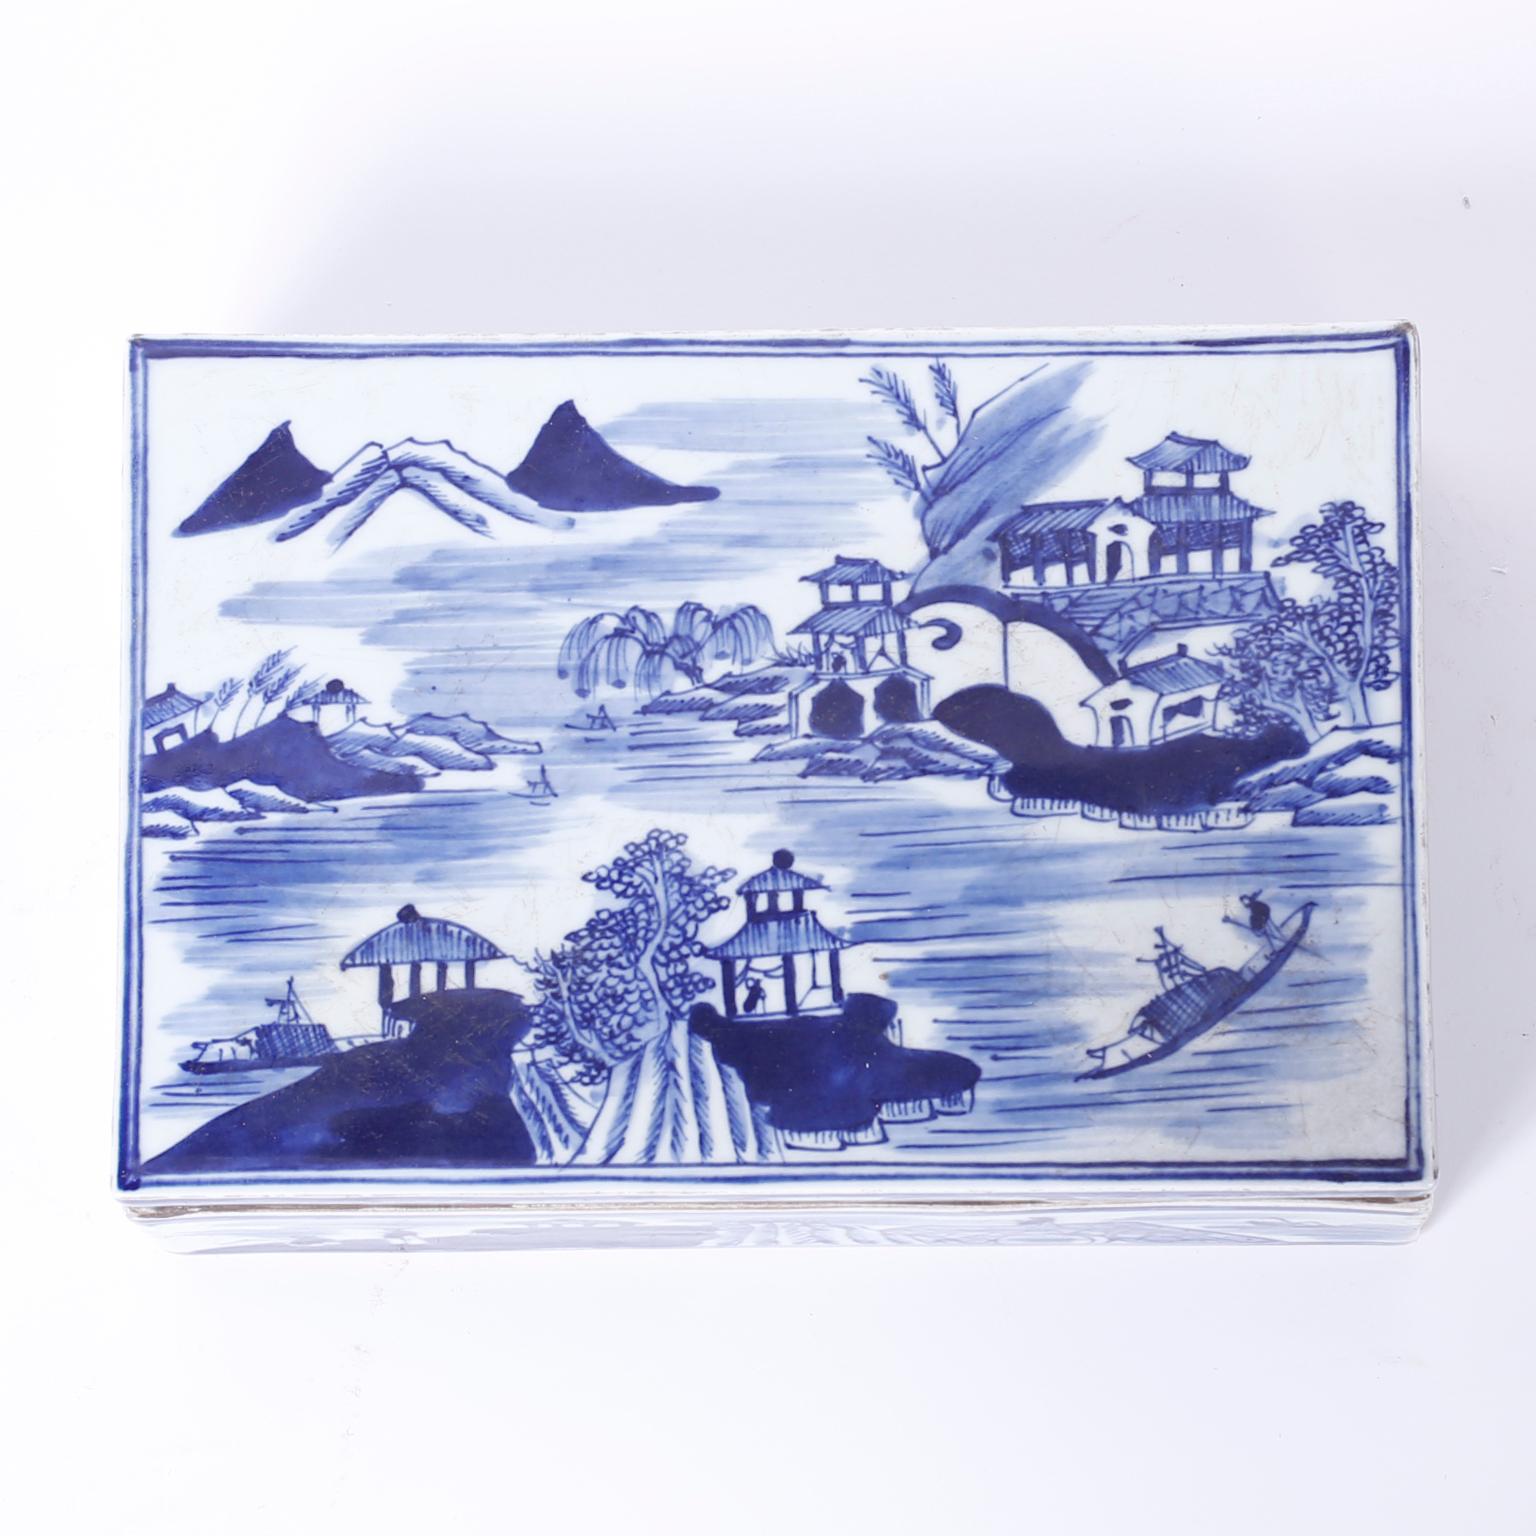 Chinese export style blue and white porcelain box decorated with classic chinoiserie landscapes. The removable lid reveals an interior divided into six sections.